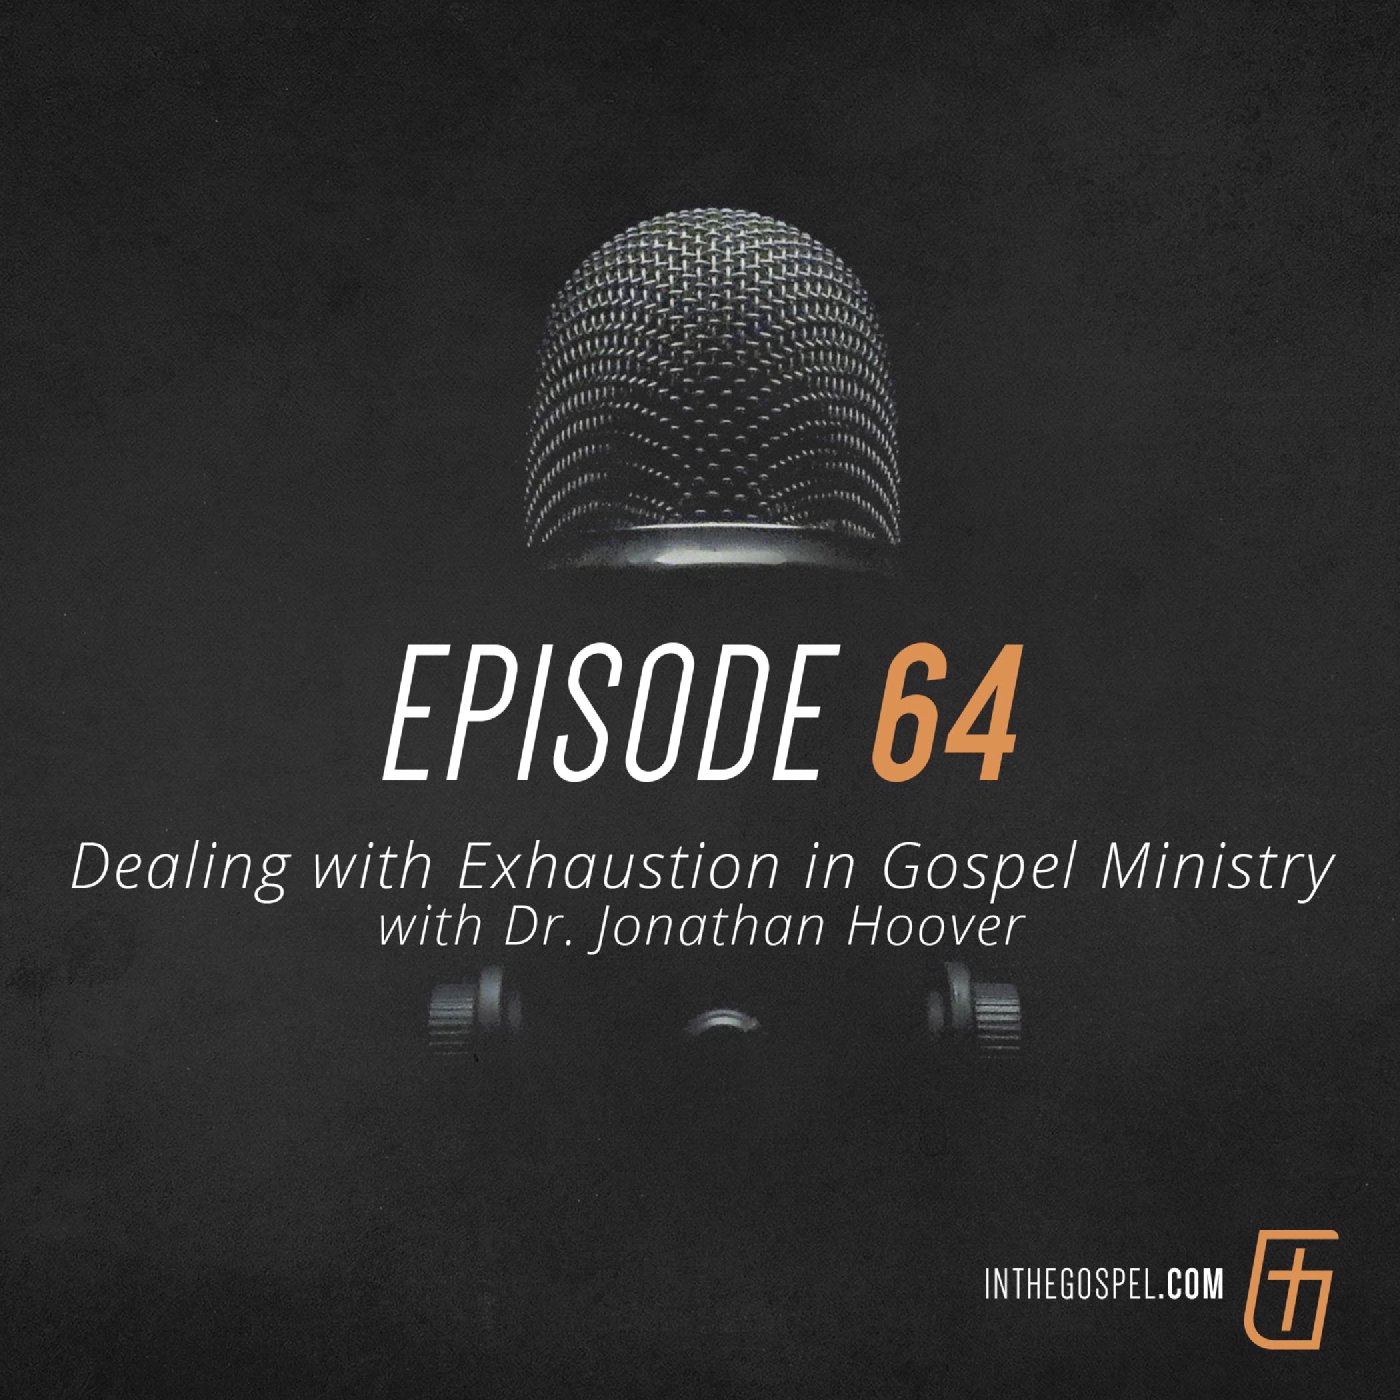 Episode 64: Dealing with Exhaustion in Gospel Ministry with Dr. Jonathan Hoover